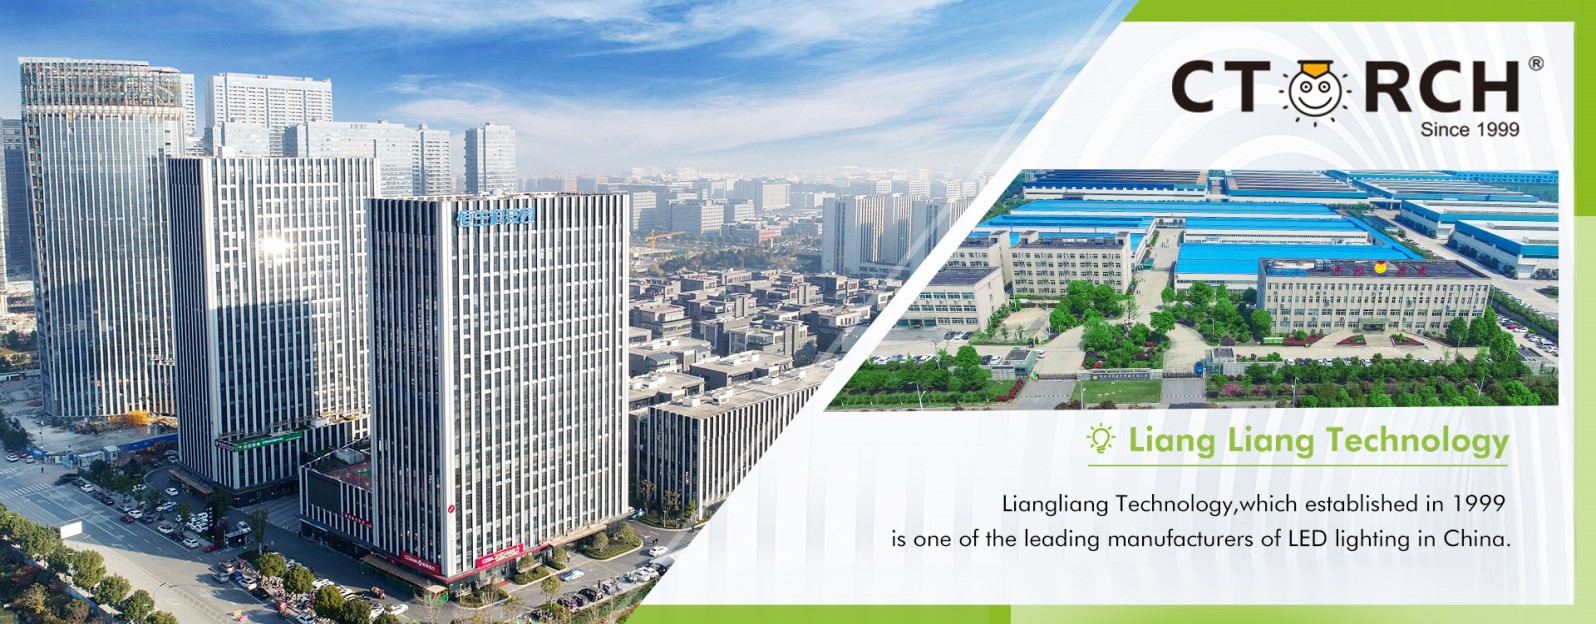 About Liangliang